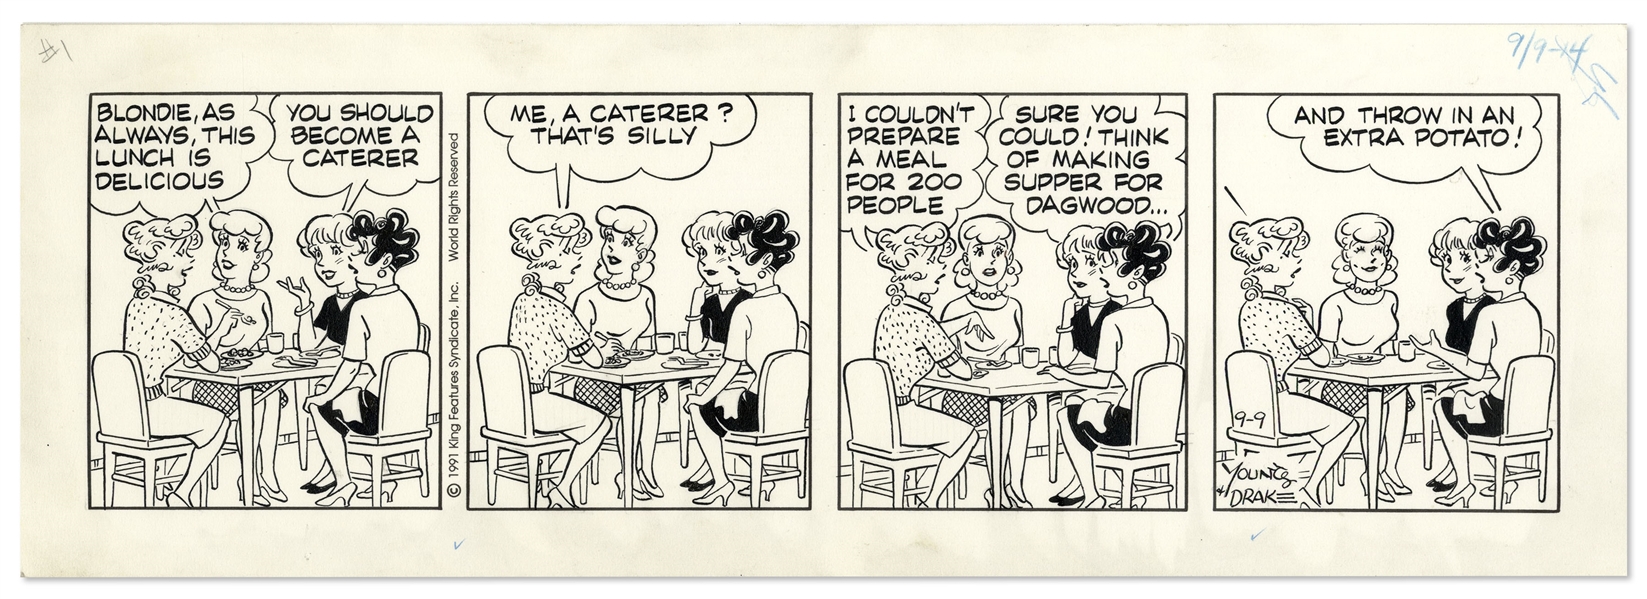 ''Blondie'' Comic Strip From 1991 -- Blondie Gets the Idea to Open a Catering Business, at the Suggestion of One of Her Friends